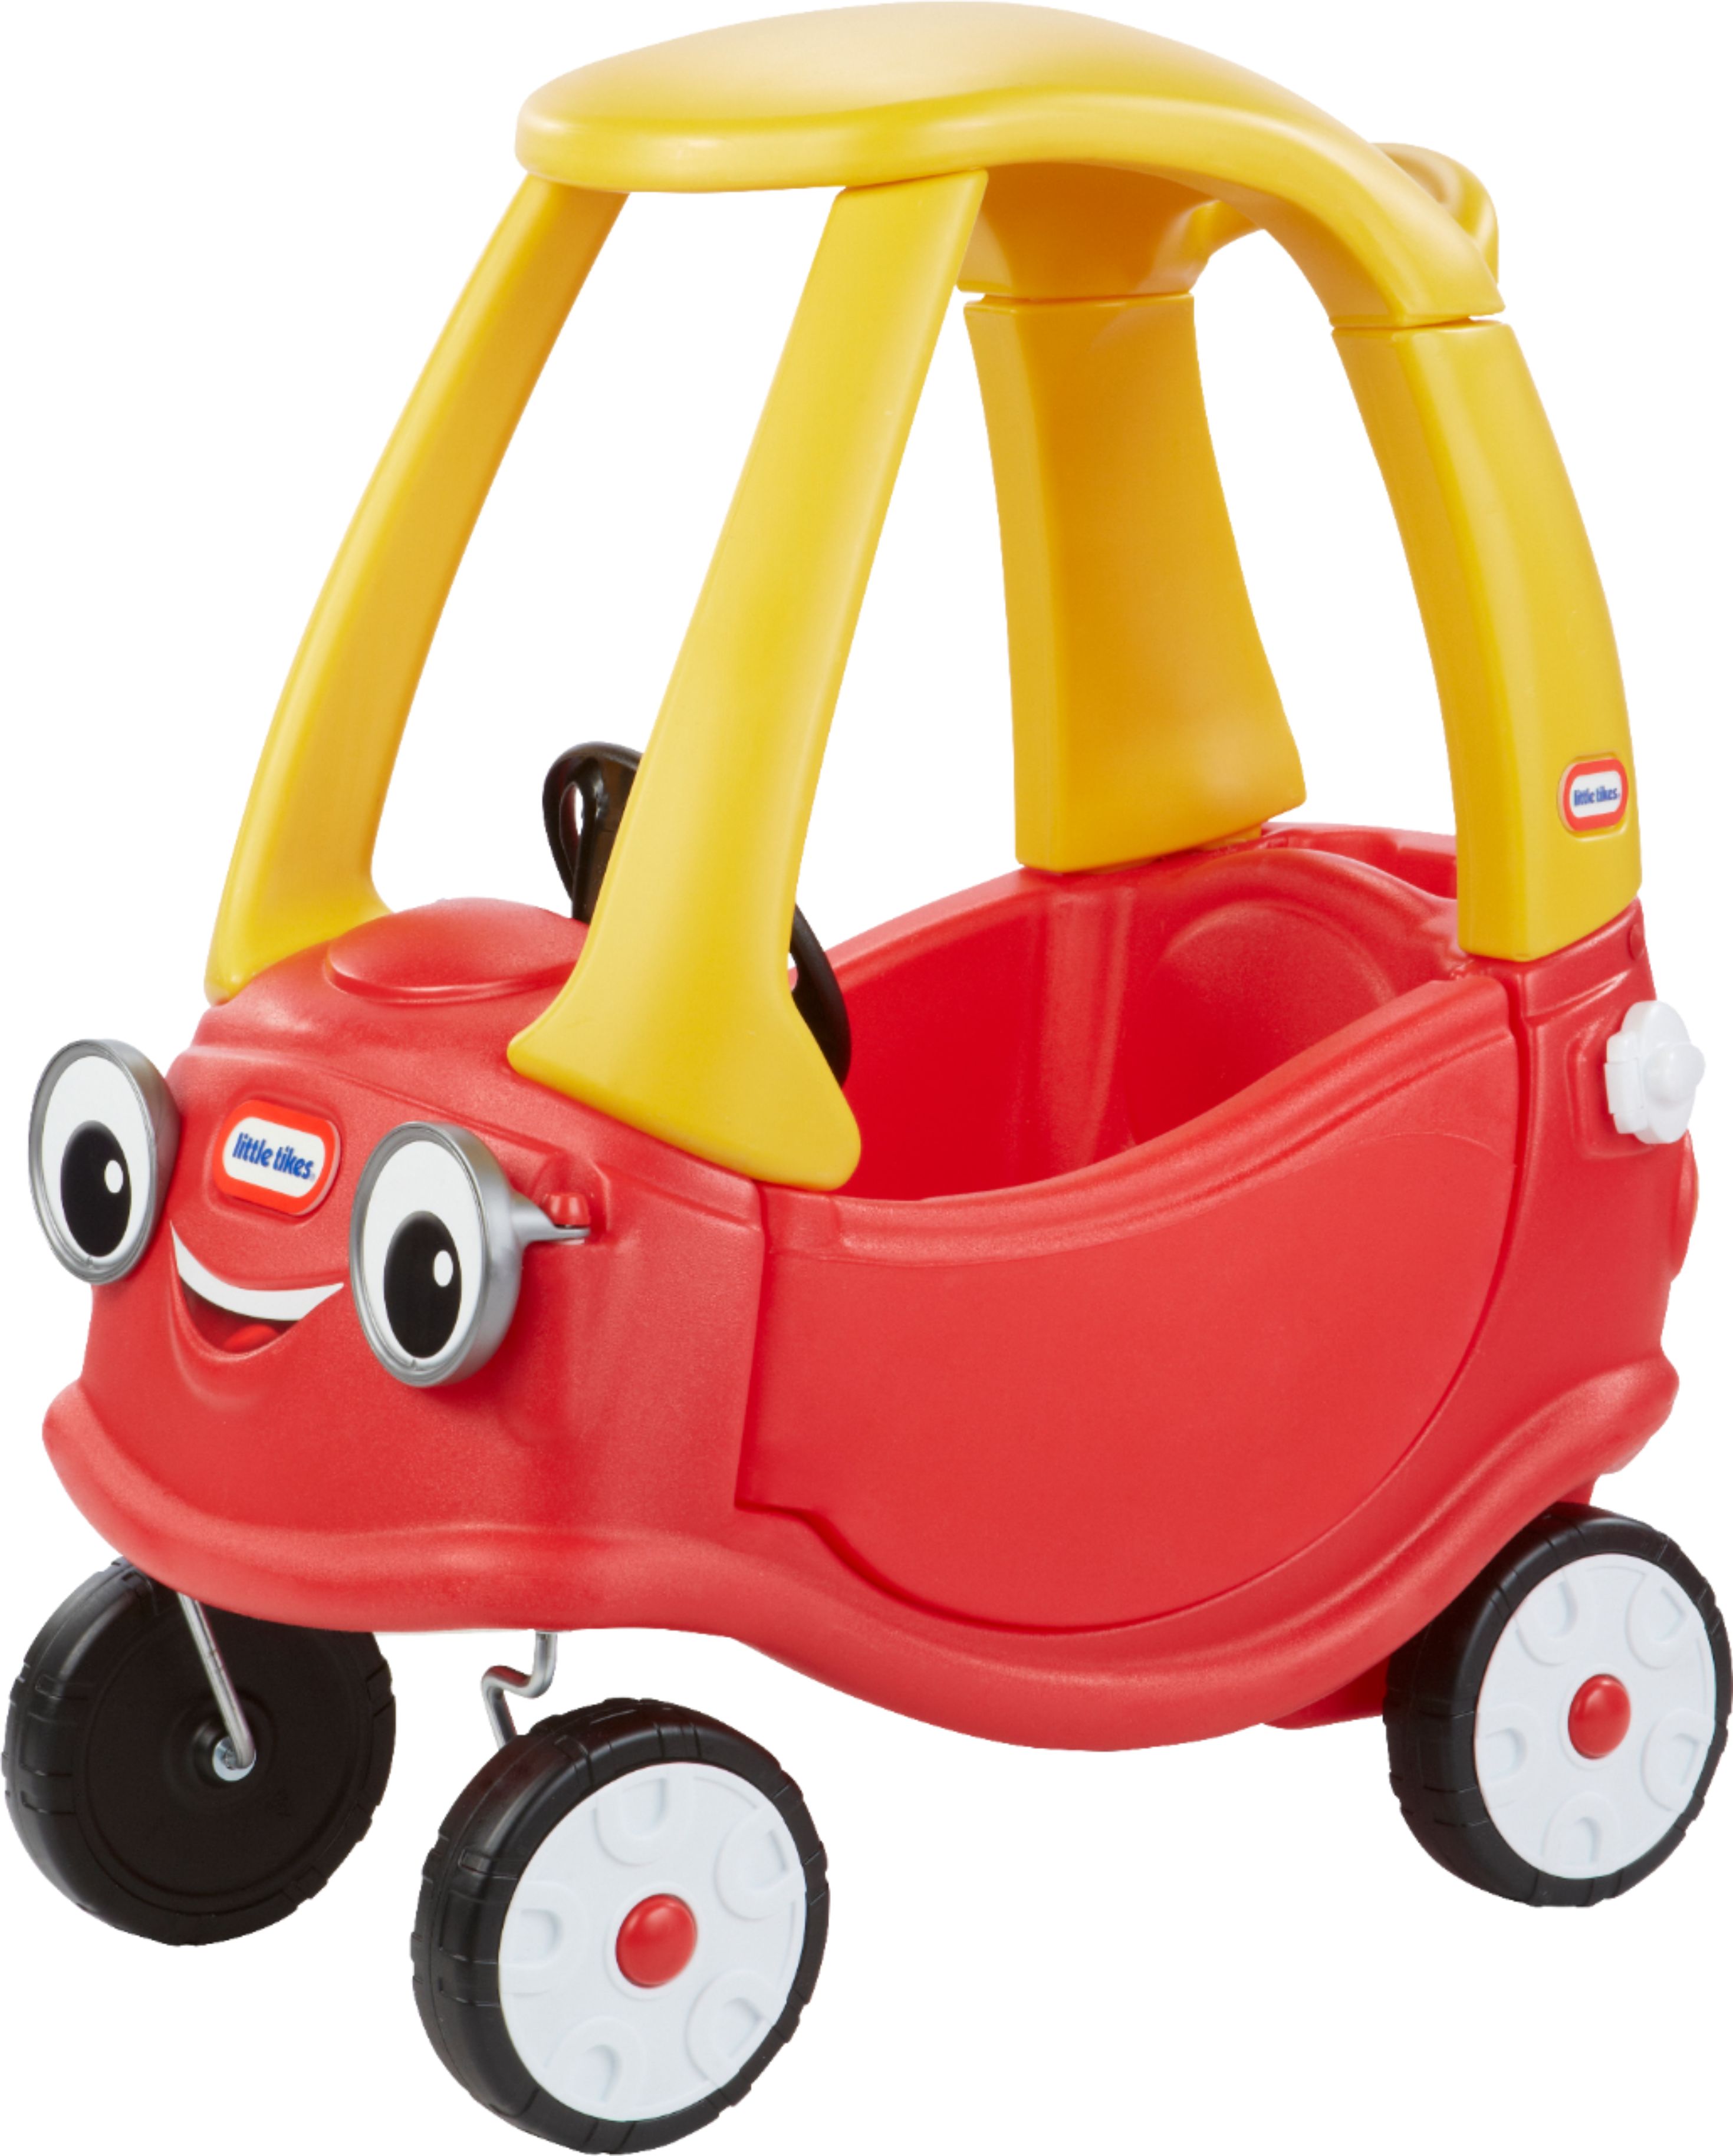 Little Tikes Cozy Coupe Ride On Toy for Toddlers and Kids! - image 1 of 5